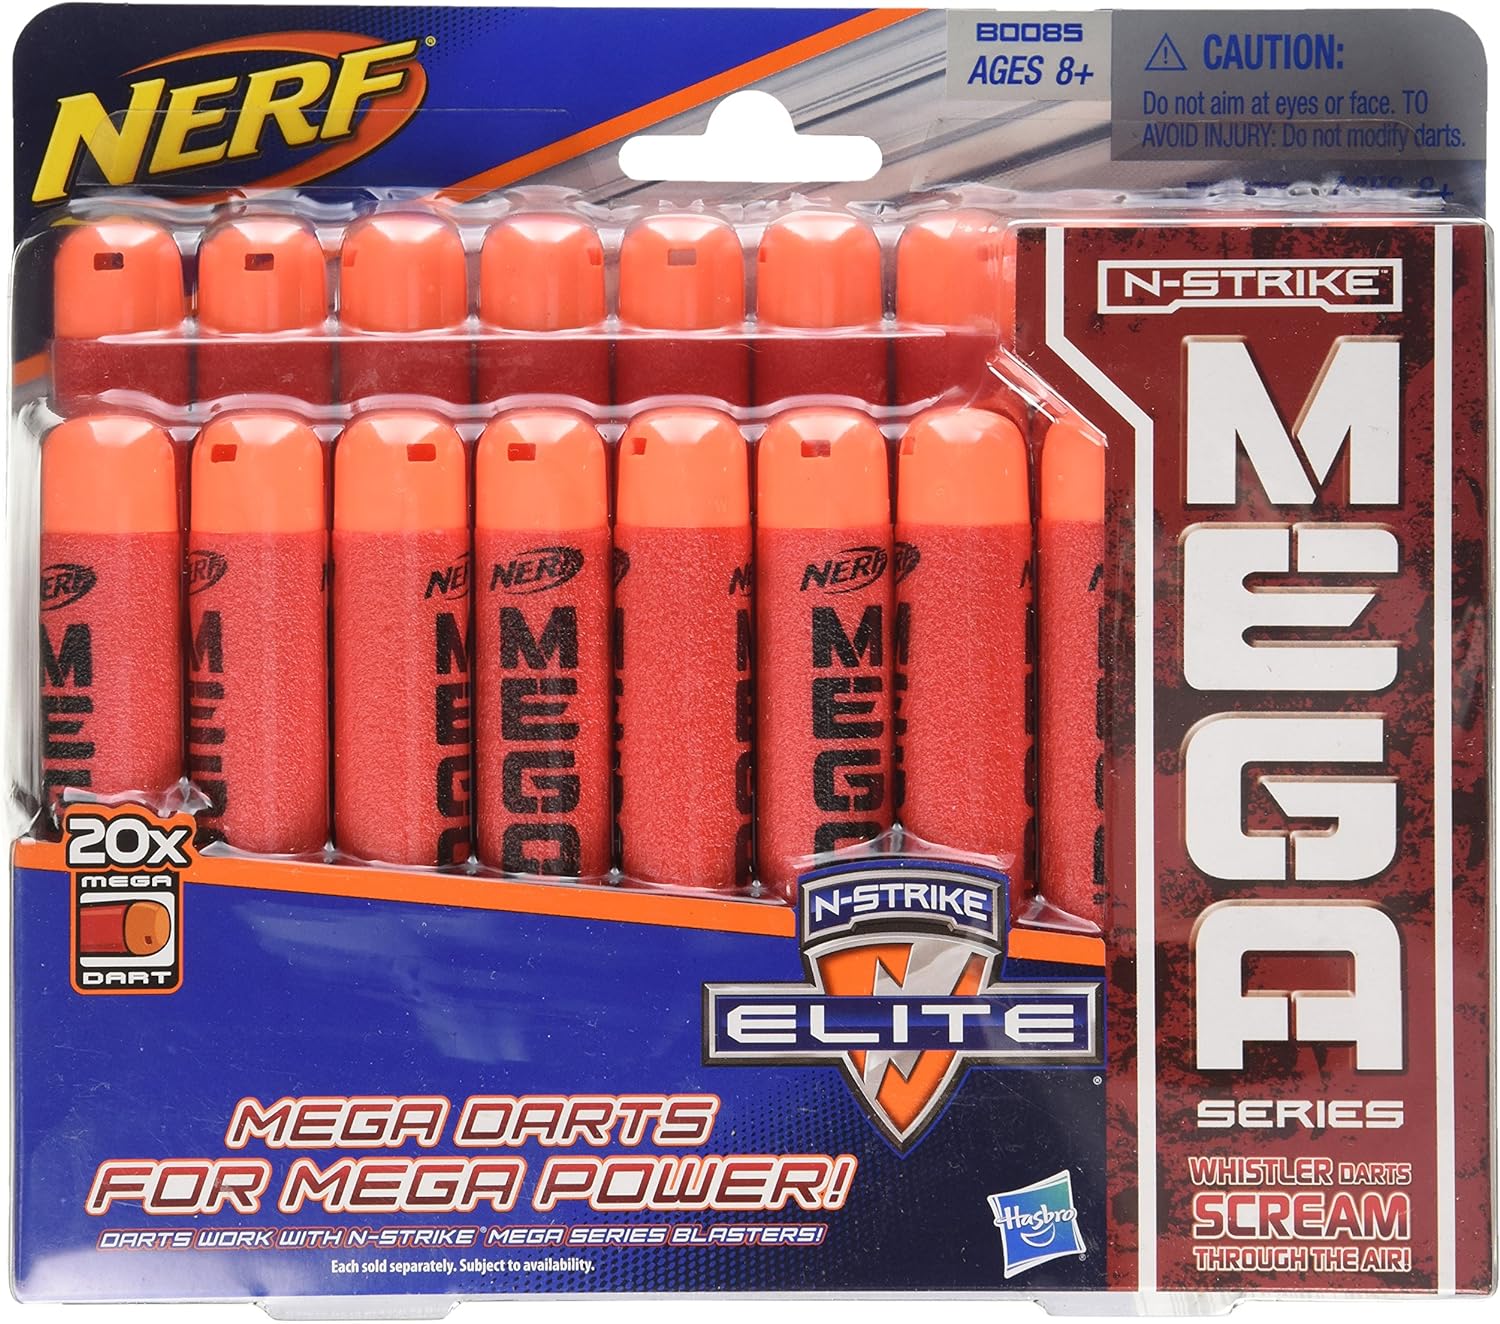 Our 9-year old son has a lot of Mega Nerf guns so we are constantly in search of the best bang for our buck when it comes to replacement bullets. We recently hosted a Nerf Birthday party consisting of 11 kids with many mega guns. We bought two types of bullets - generic brand mega bullets and Nerf brand mega bullets. The Nerf brand was $10.99 for 20 and the generic brand was $9.95 for 30. After 2.5 hours of aggressive, crazy, action in both optimal (indoor) and snowy, wet conditions, the Nerf br